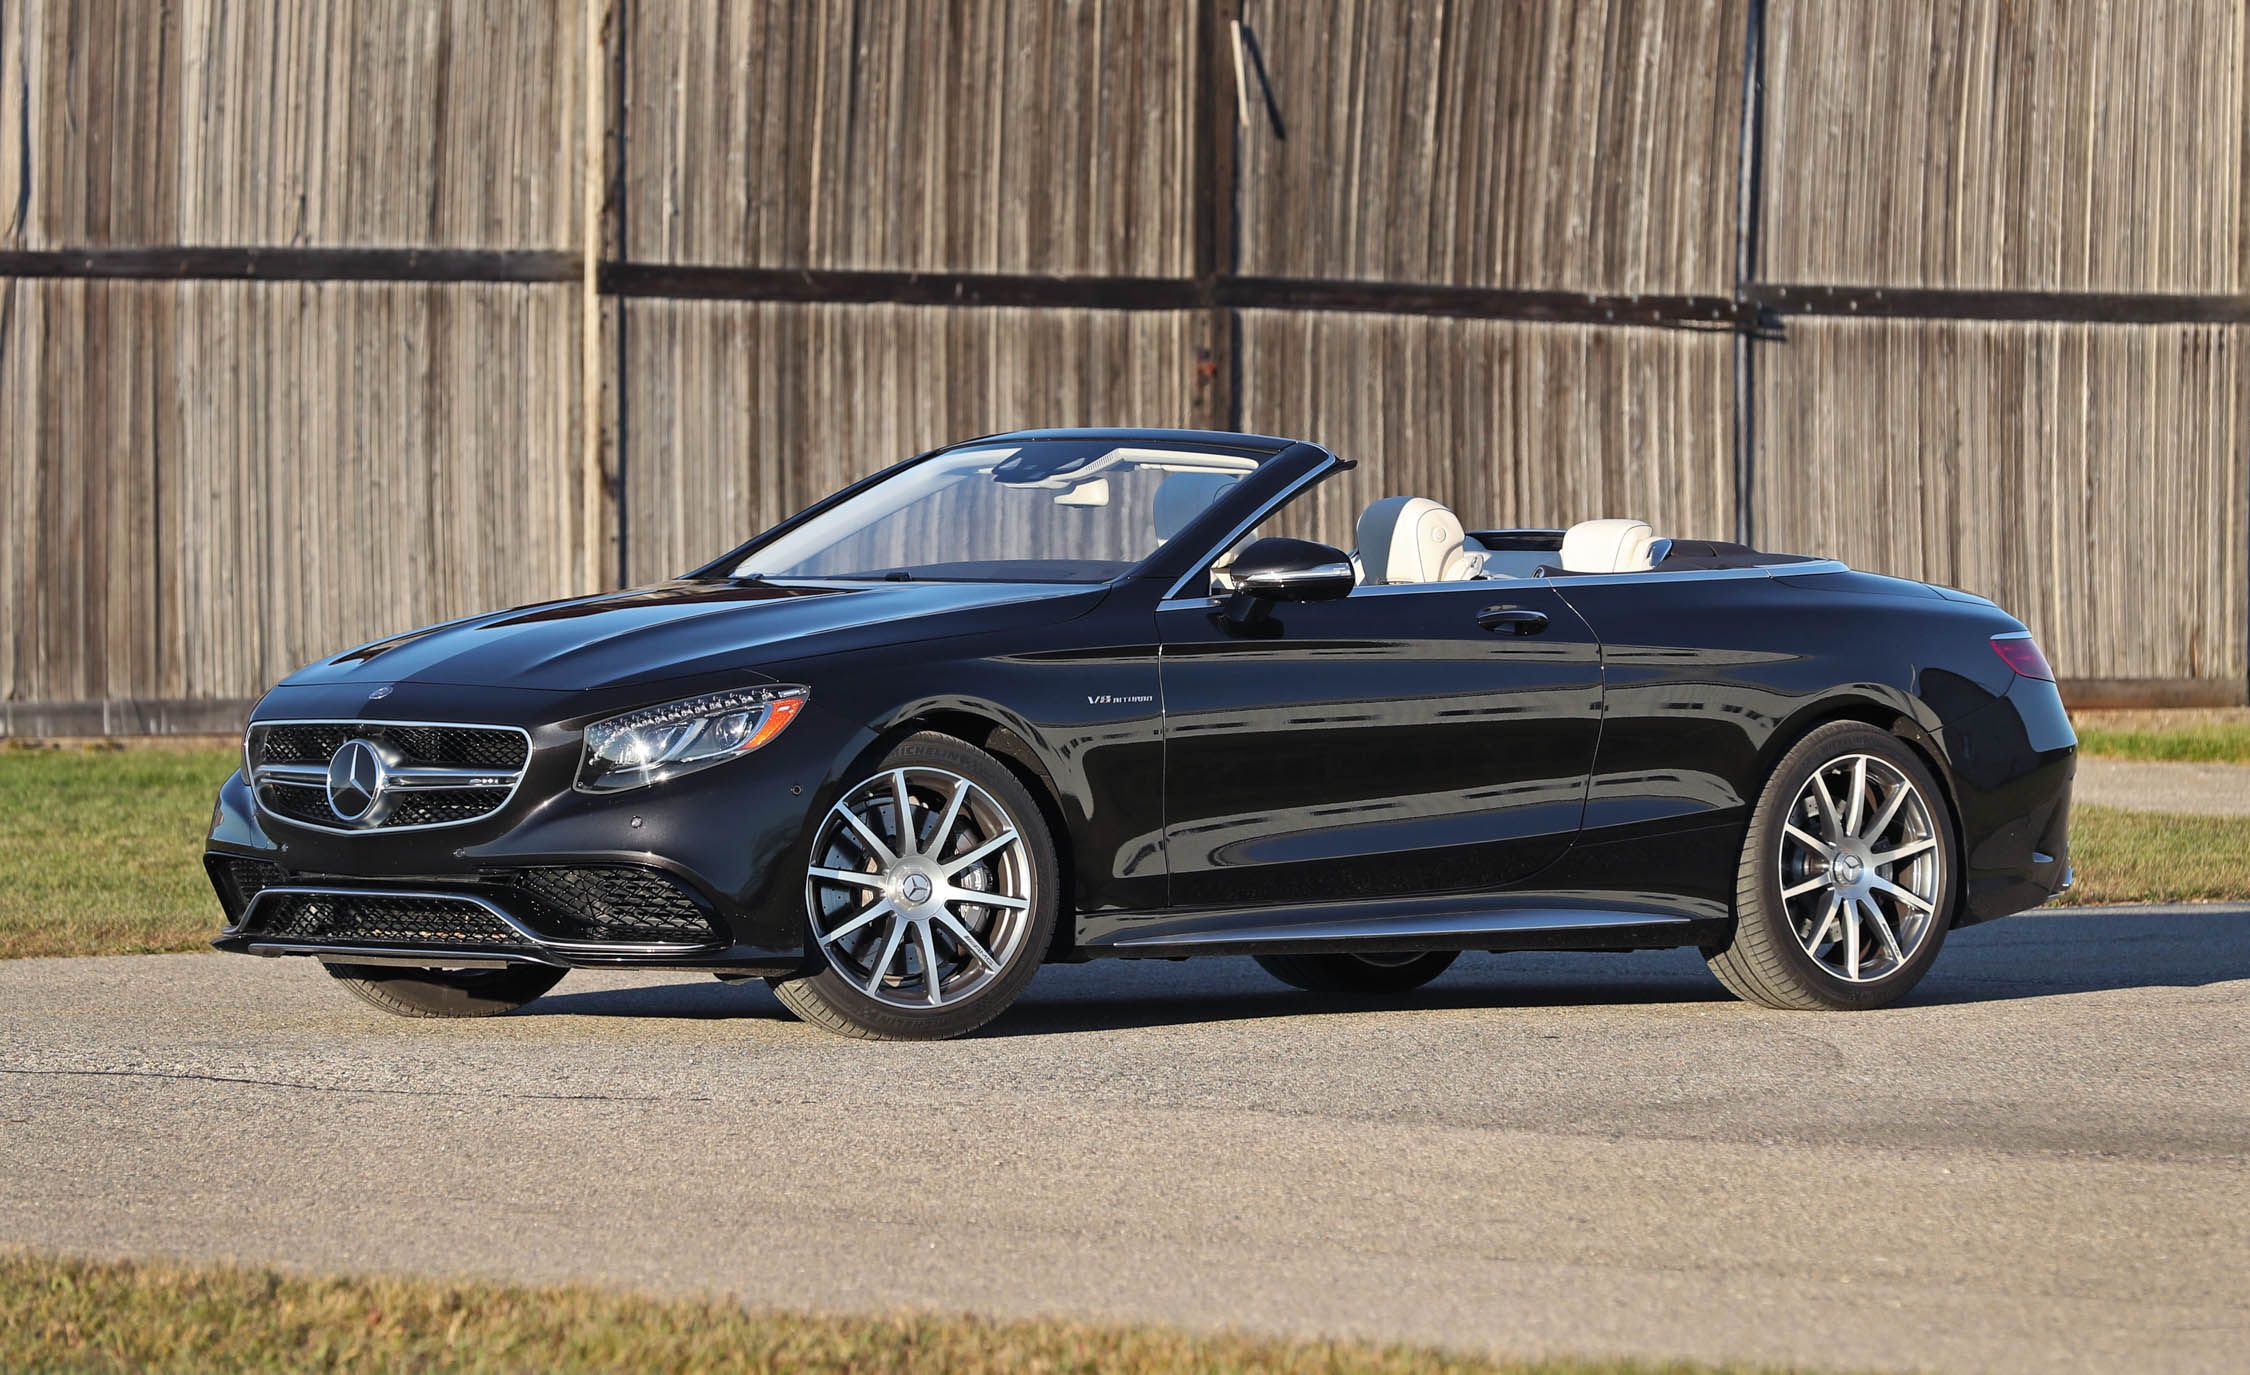 2017 Mercedes Amg S63 Cabriolet Exterior Front And Side Roof Open (View 38 of 38)